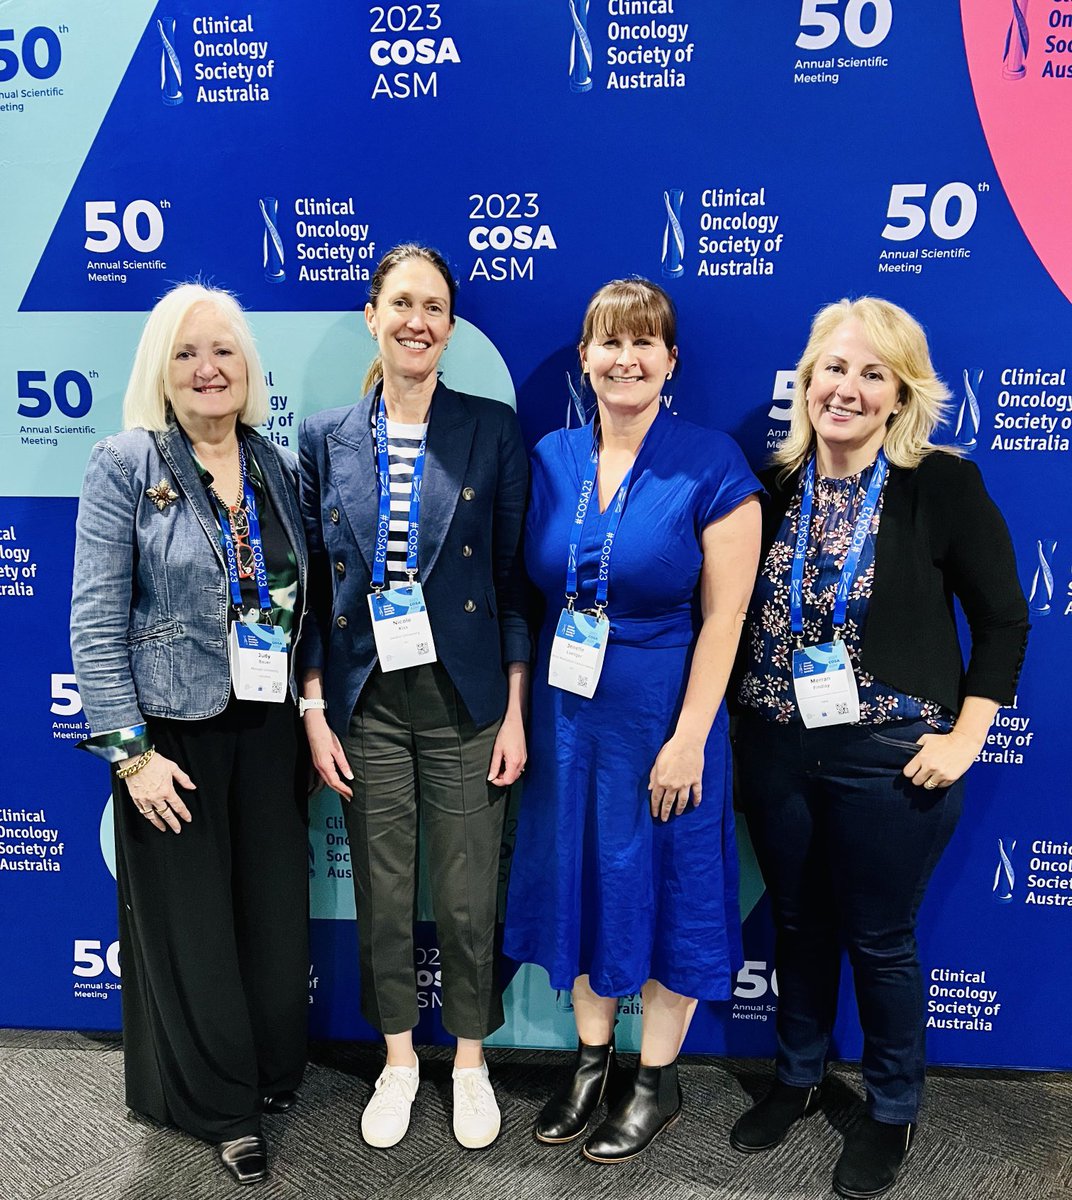 Fab Four #COSA Nutrition Group Chairs past and present ⁦@ProfJudyBauer⁩ @NicoleKKiss⁩ Jenelle Loeliger ⁦@MerranFindlay👏